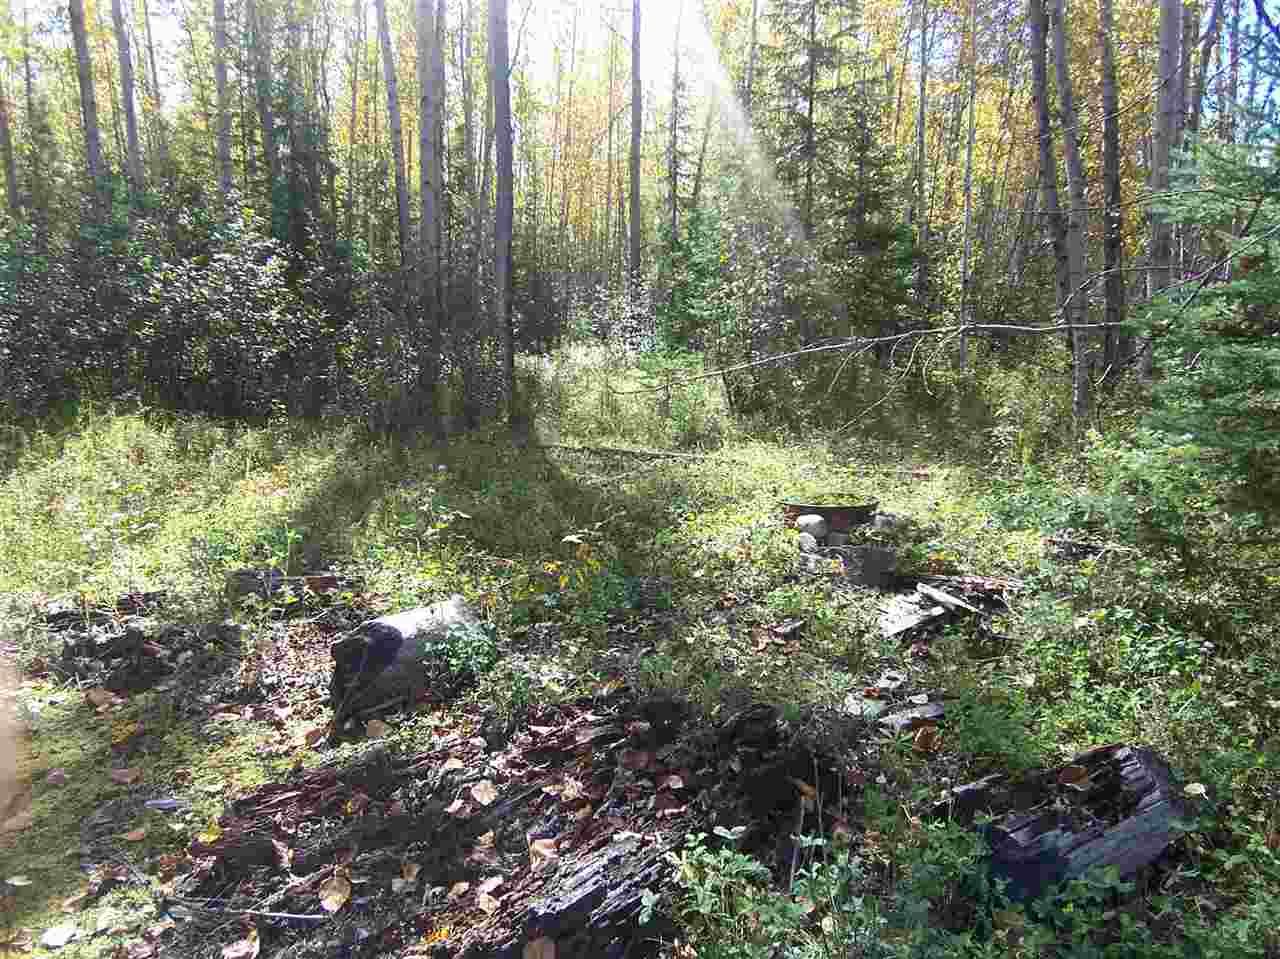 Photo 10: Photos: 4682 BARKERVILLE Highway in Quesnel: Quesnel - Rural North Land for sale (Quesnel (Zone 28))  : MLS®# R2105293